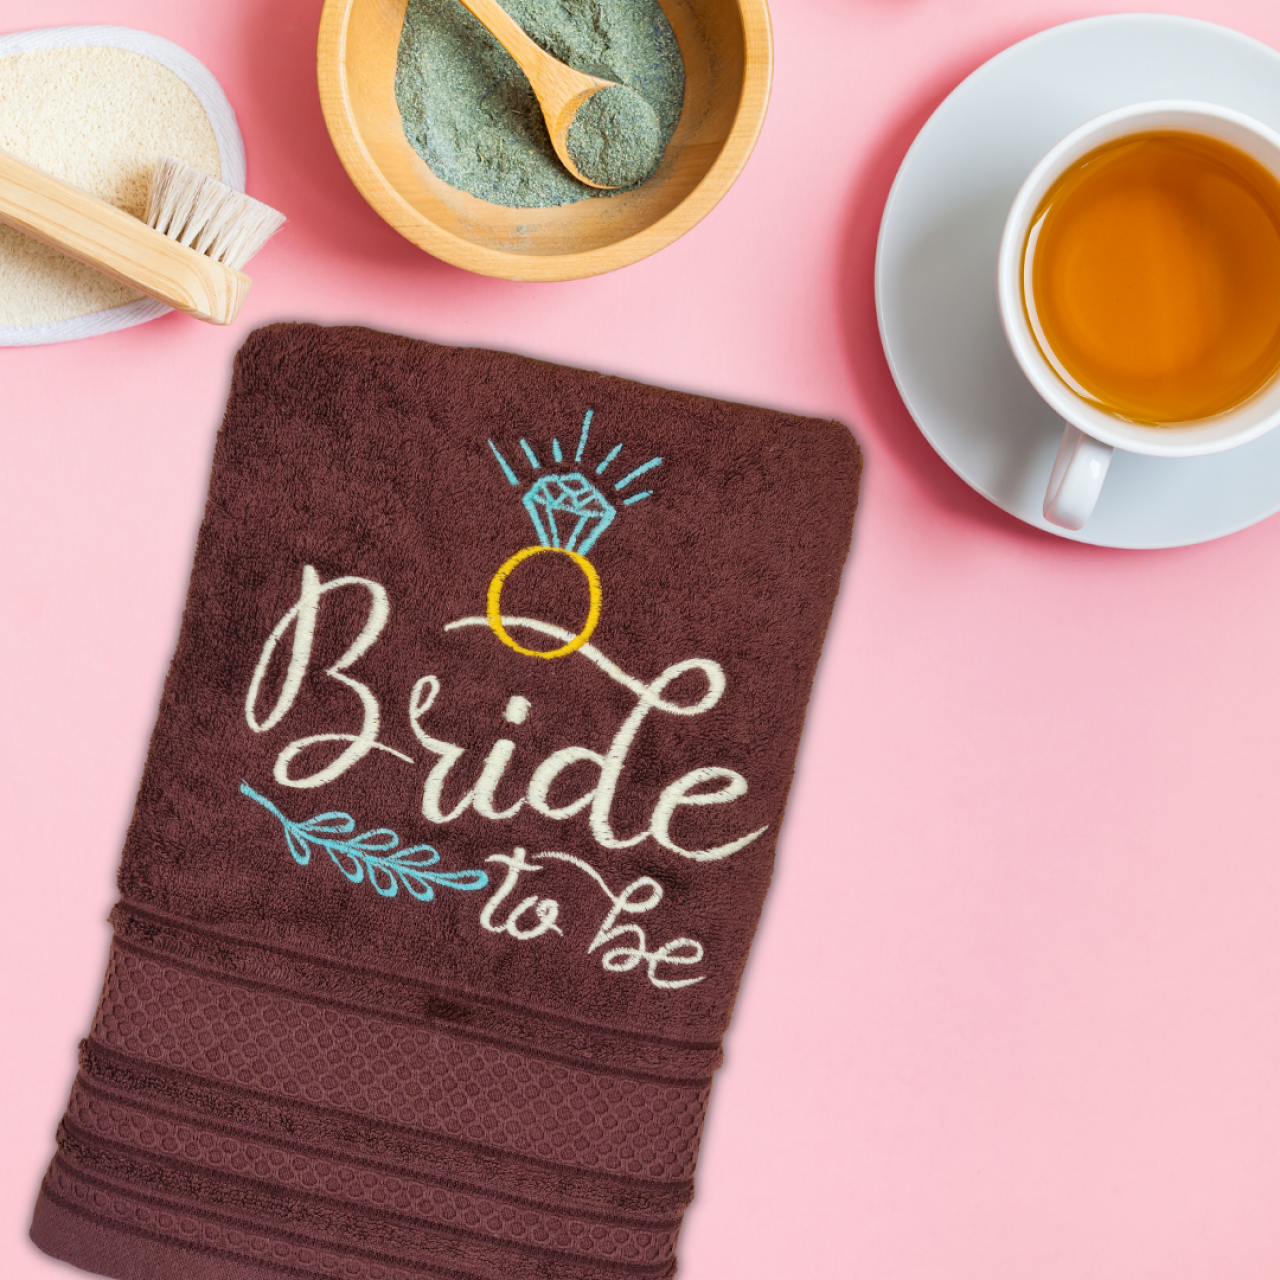 Personalized Bride To be Cotton Towel For Her